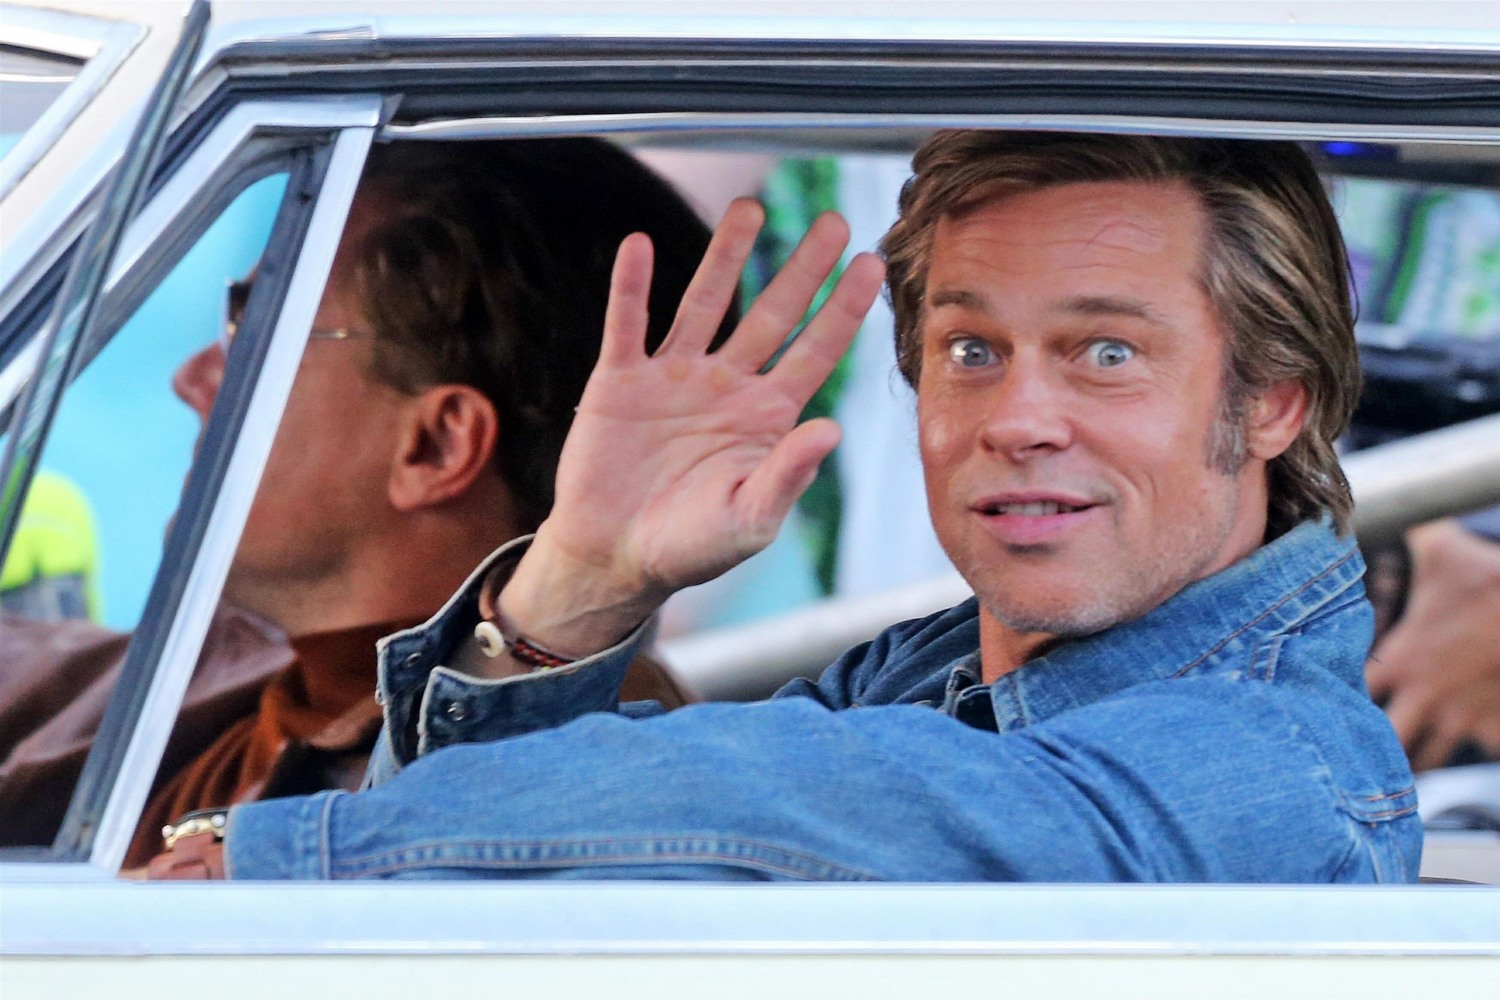 Brad Pitt and Leonardo DiCaprio back in their car on the set of 'Once Upon a Time in Hollywood'